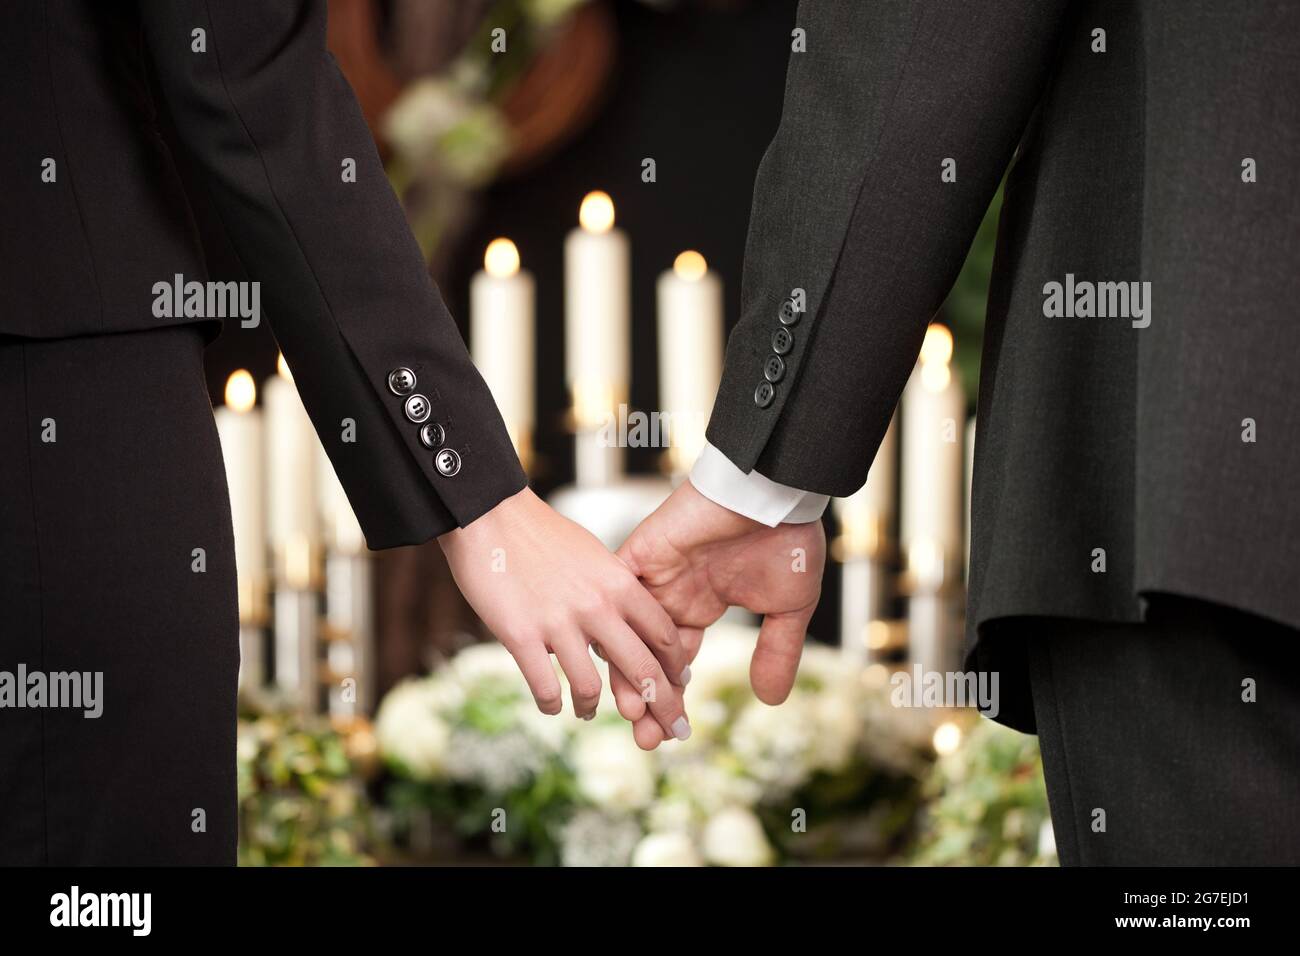 Religion, death and dolor  - couple at funeral holding hands consoling each other in view of the loss Stock Photo